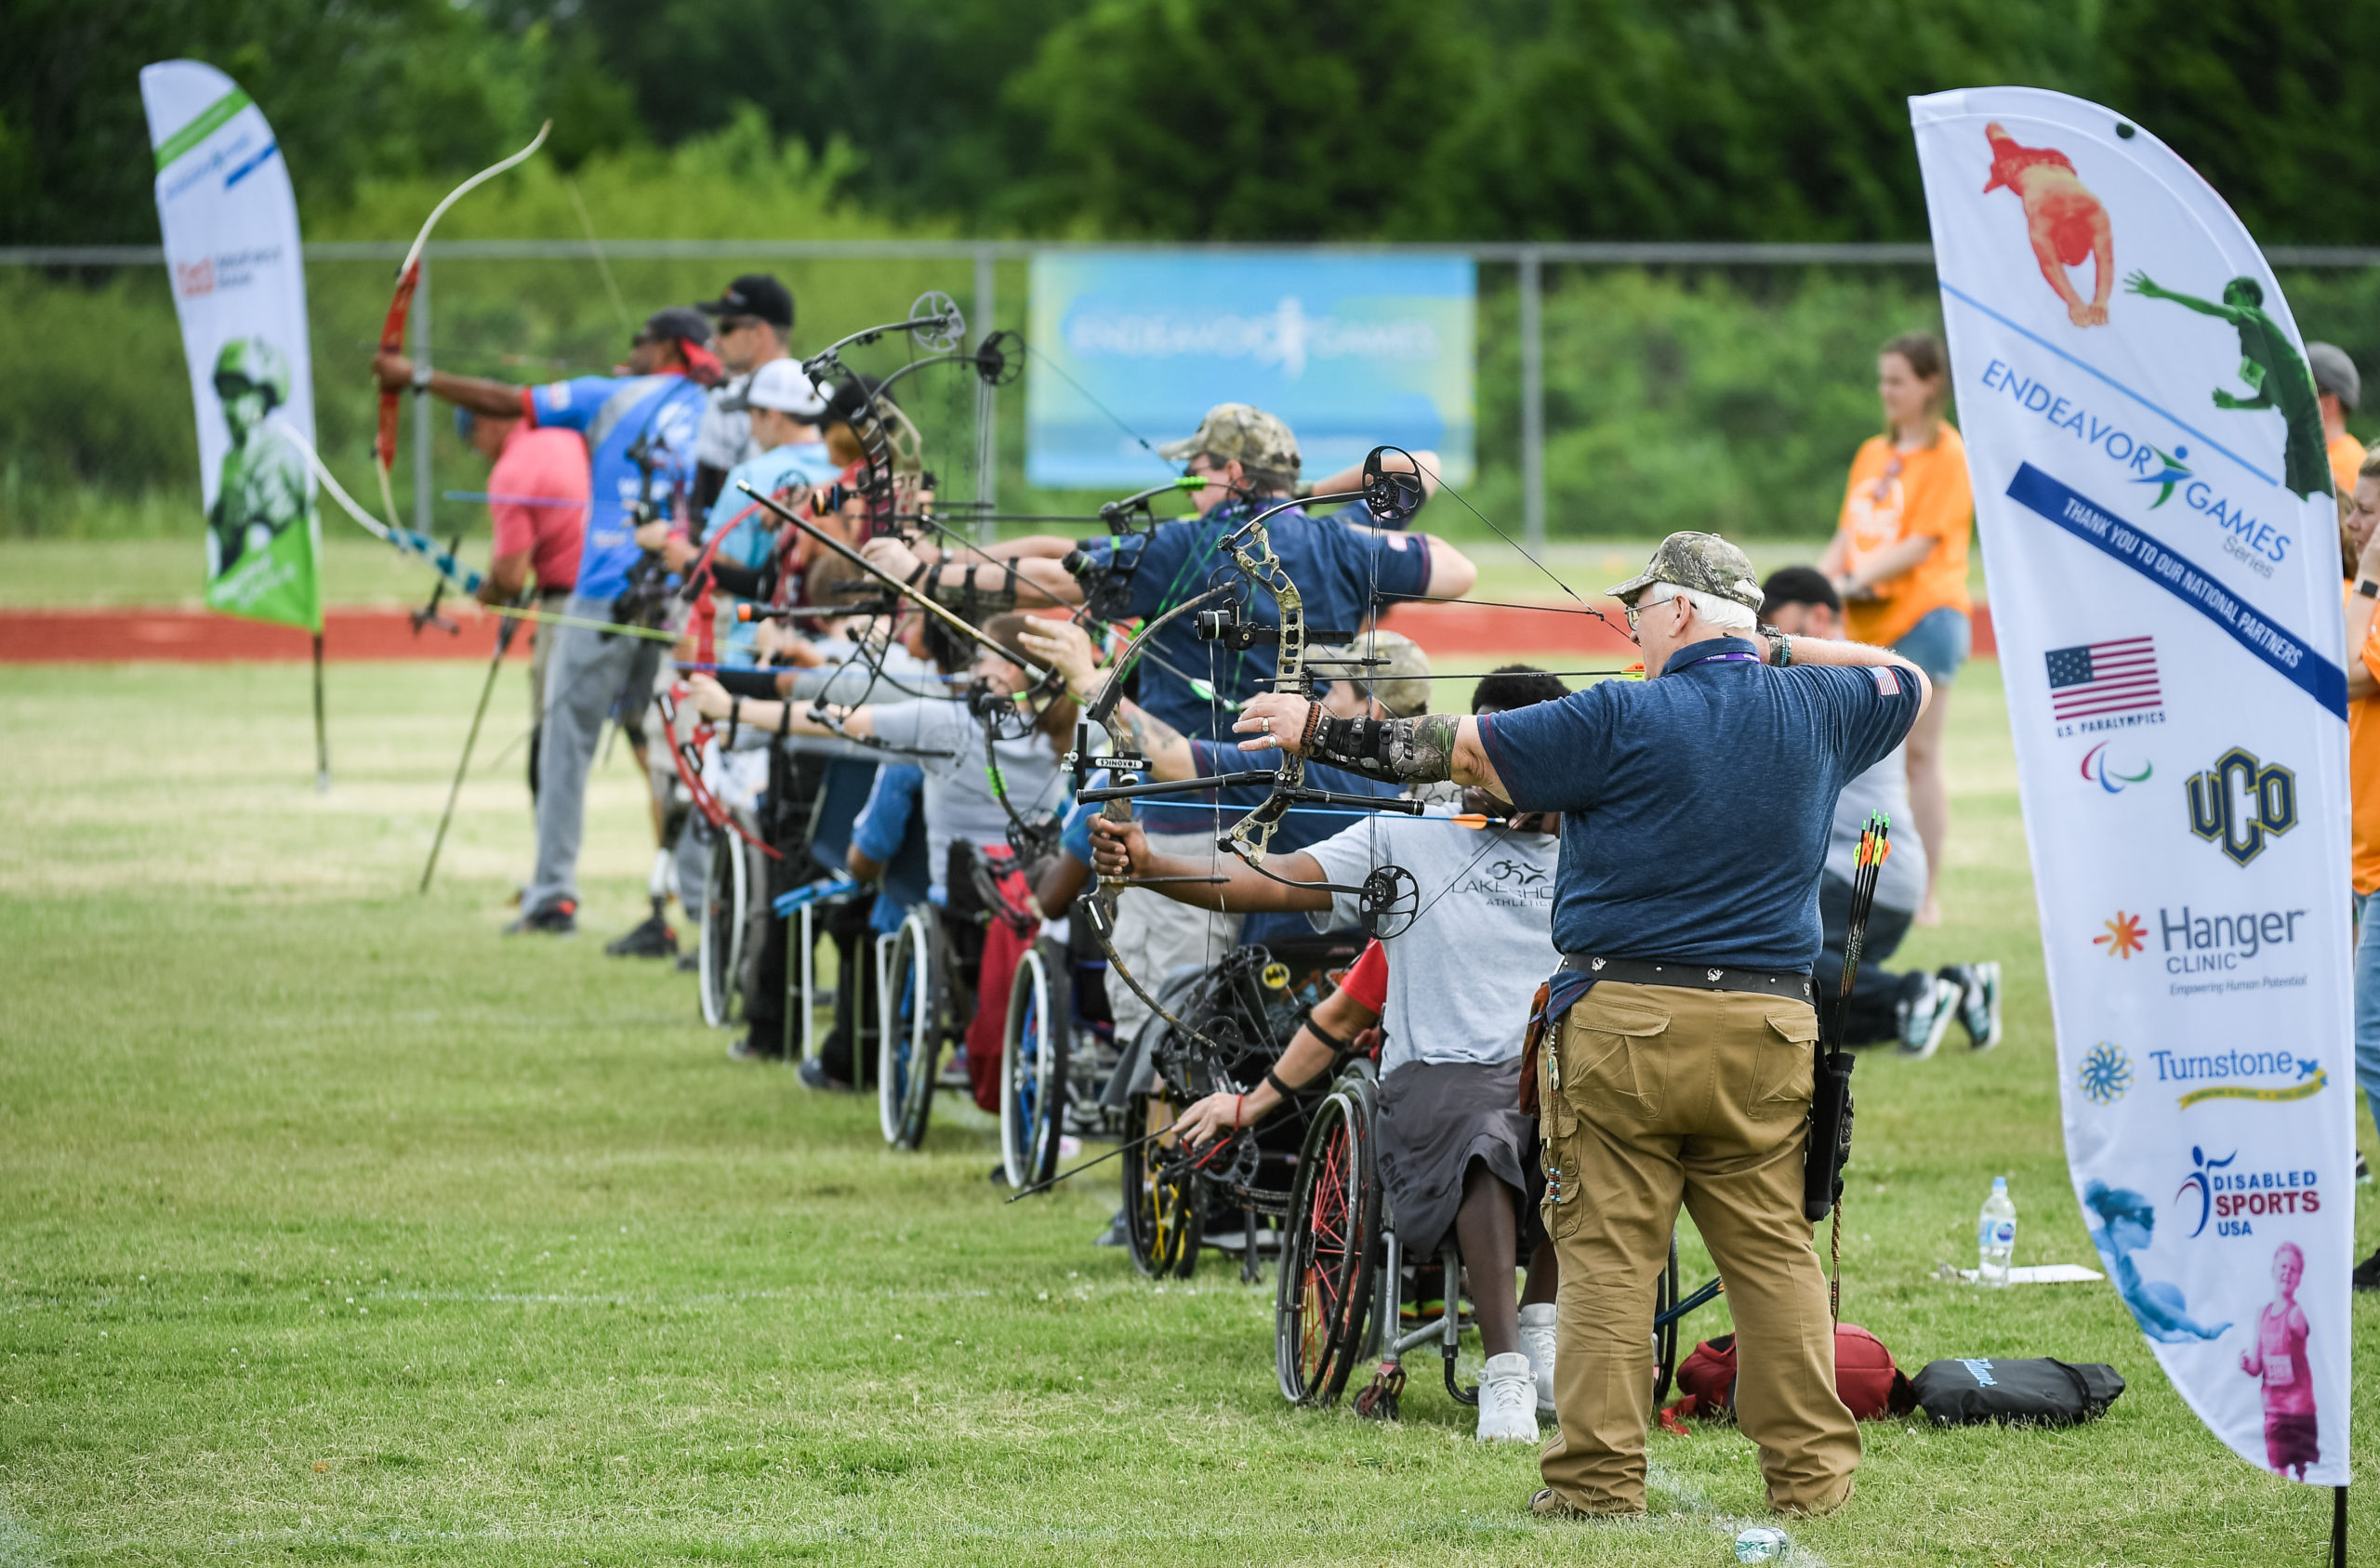 Athletes in wheelchairs and standing doing archery